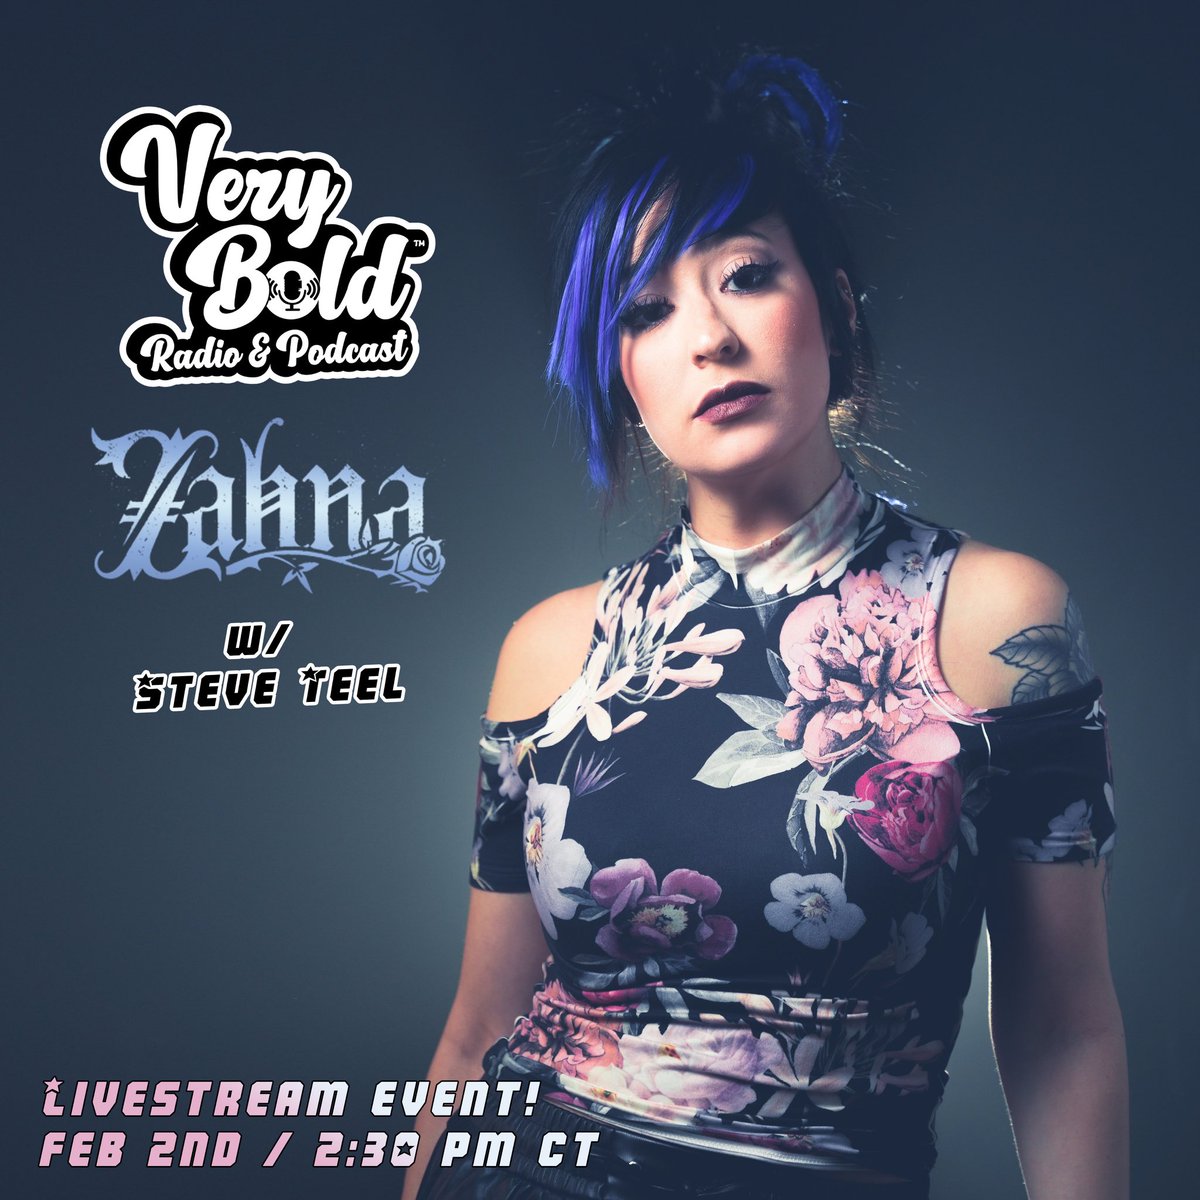 Catch me live streaming from TikTok and Instagram Friday Feb 2nd to hang with yall and @VeryBold podcast! It’s been a while so come hang! 😍 @zahnaoffical